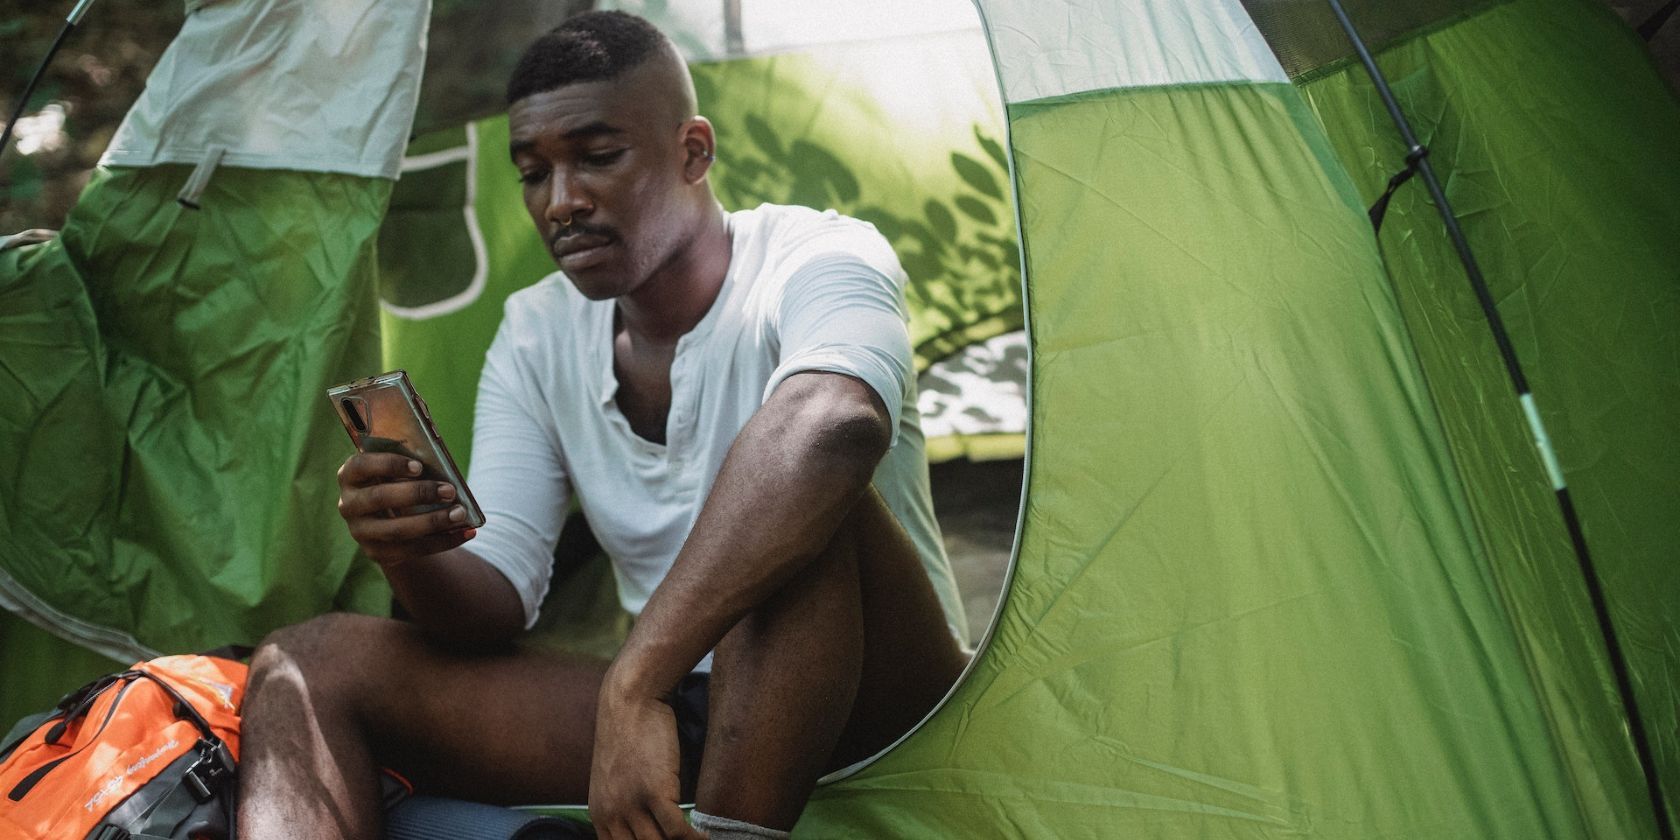 Man outdoors in camping tent distracted by smartphone